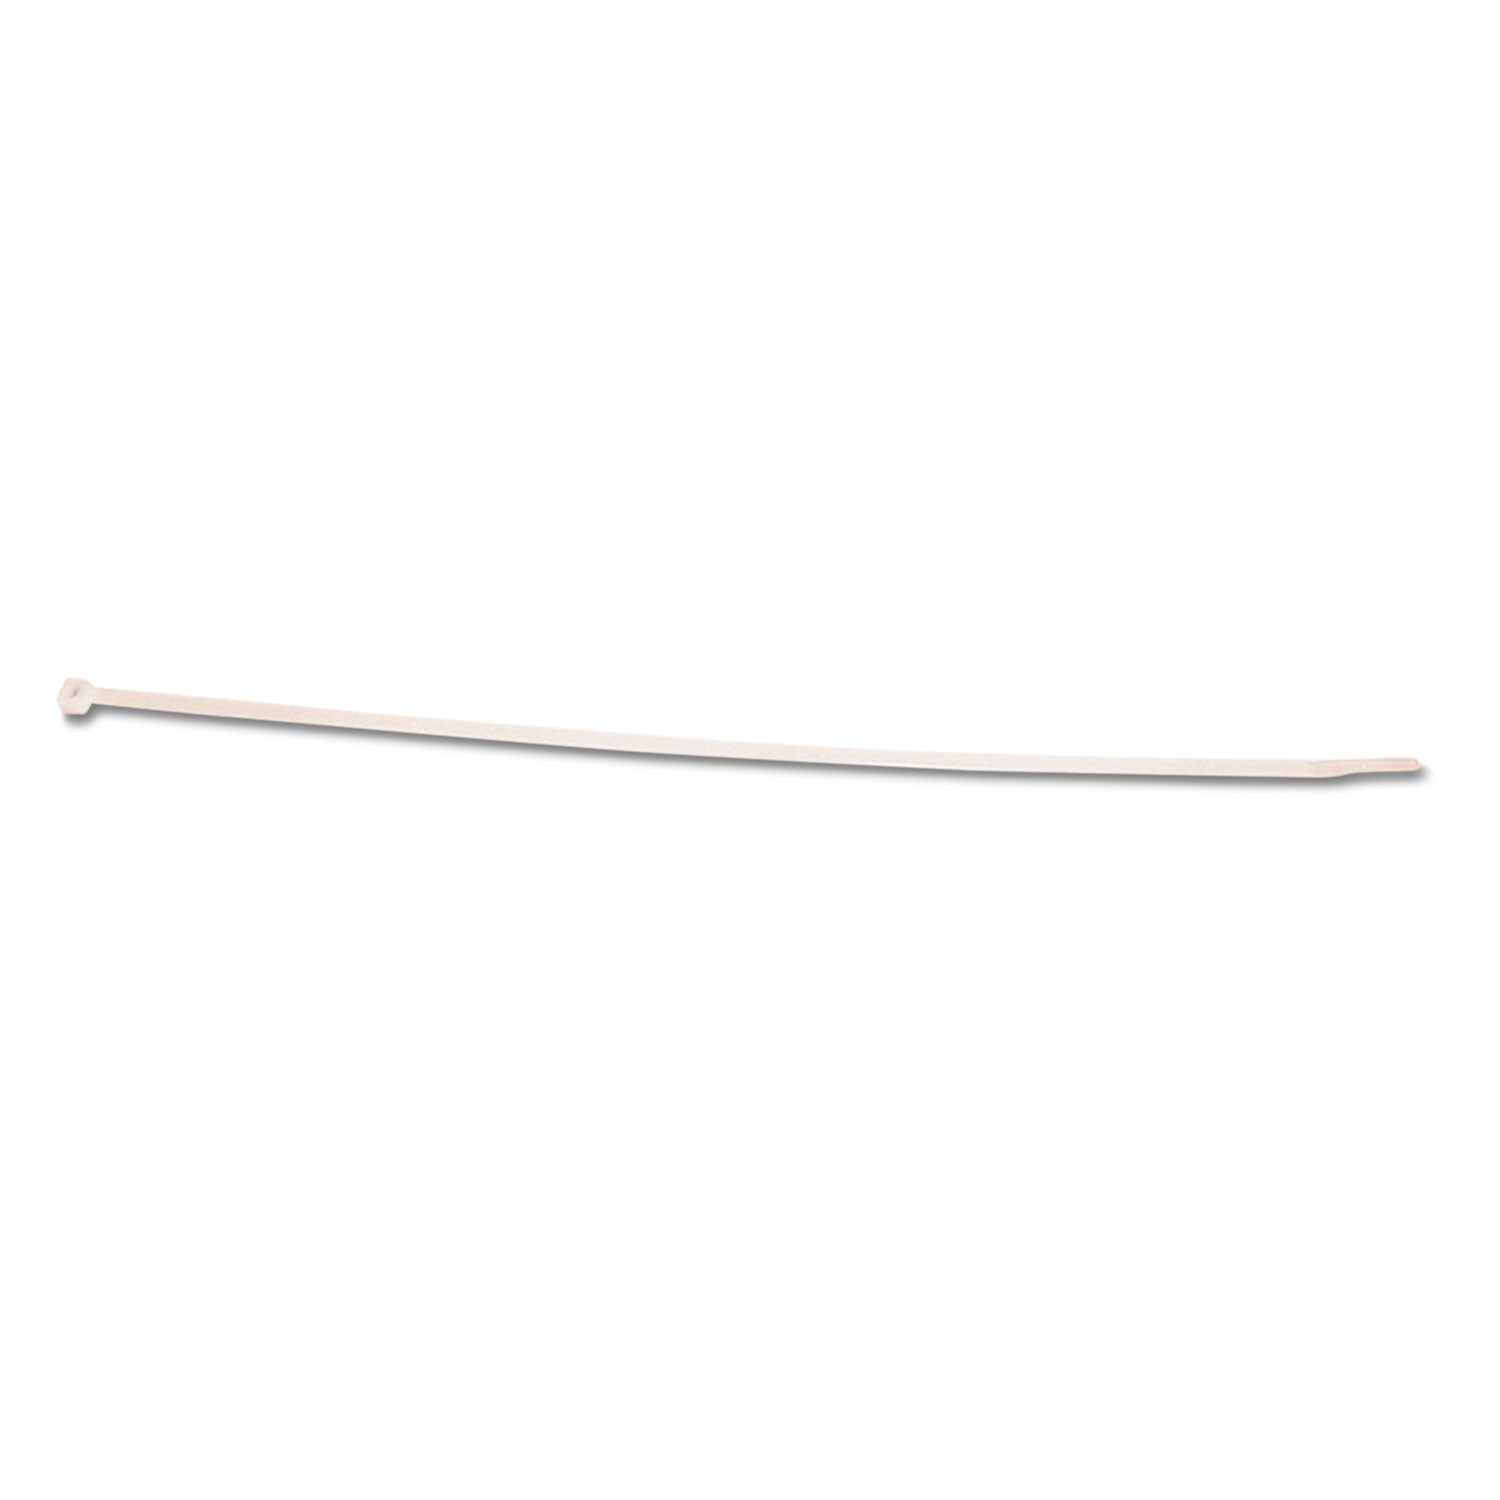 Nylon Cable Ties, 8 x 0.19, 50 lb, Natural, 1,000/Pack - 